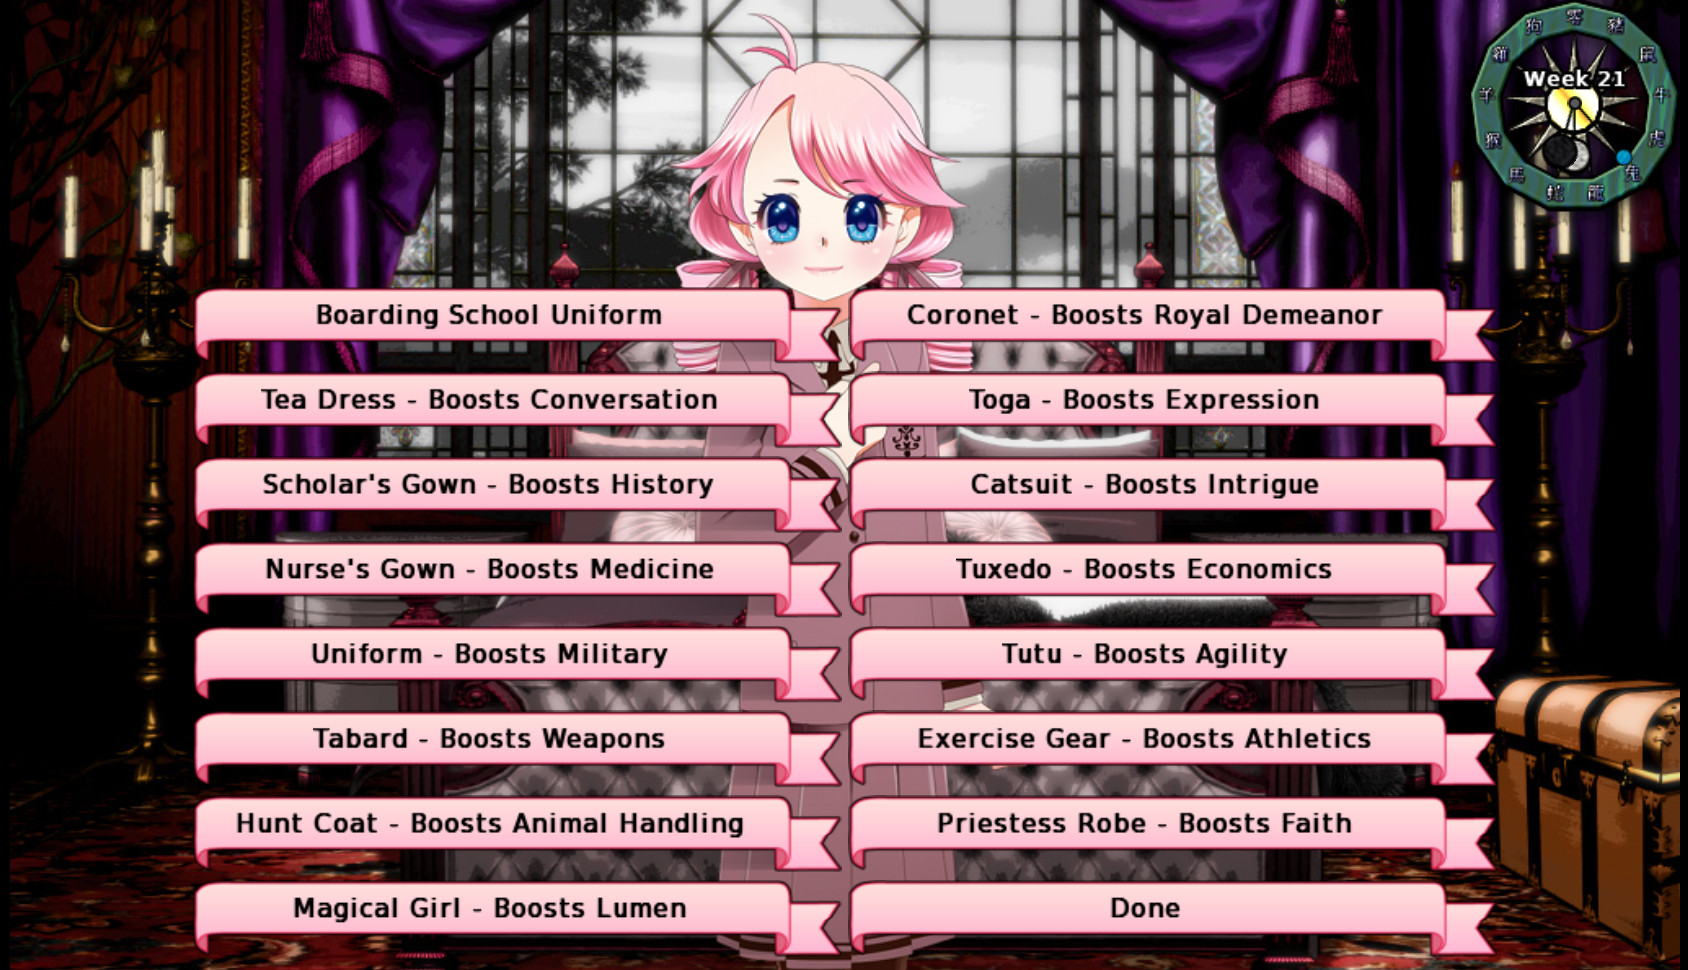 http://vignette2.wikia.nocookie.net/longlivethequeen/images/1/1e/All_the_unlockable_dresses.png/revision/latest?cb=20140119134205